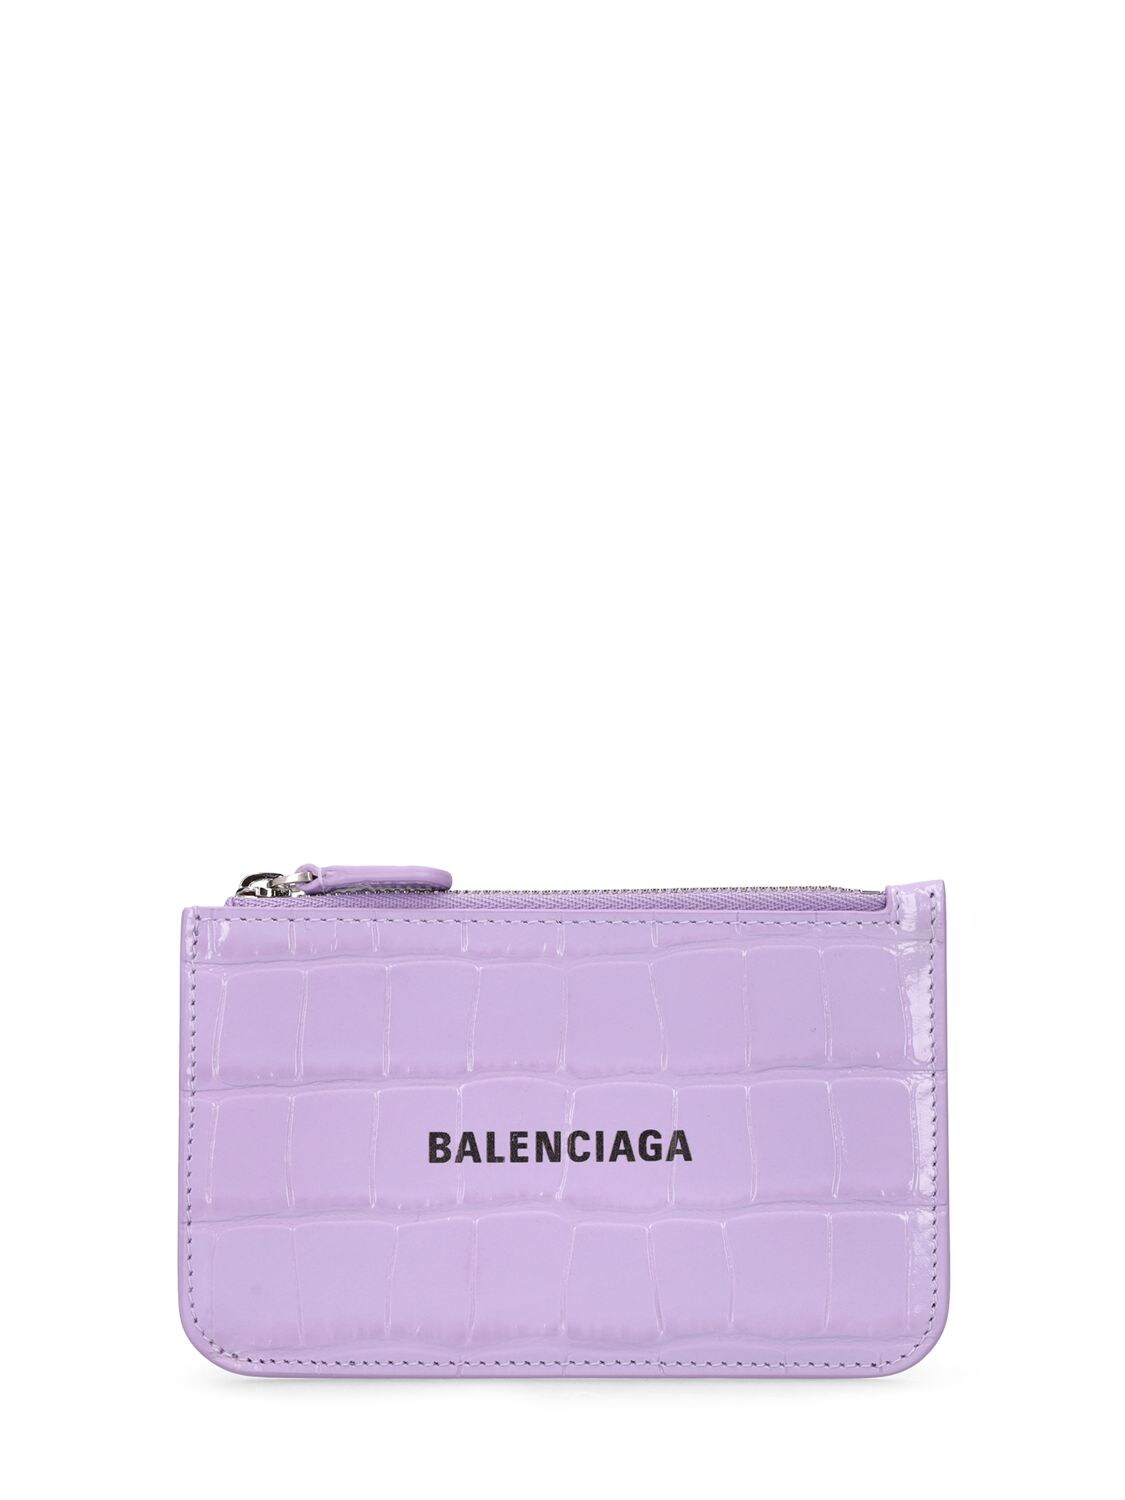 BALENCIAGA Embossed Leather Credit Card Holder